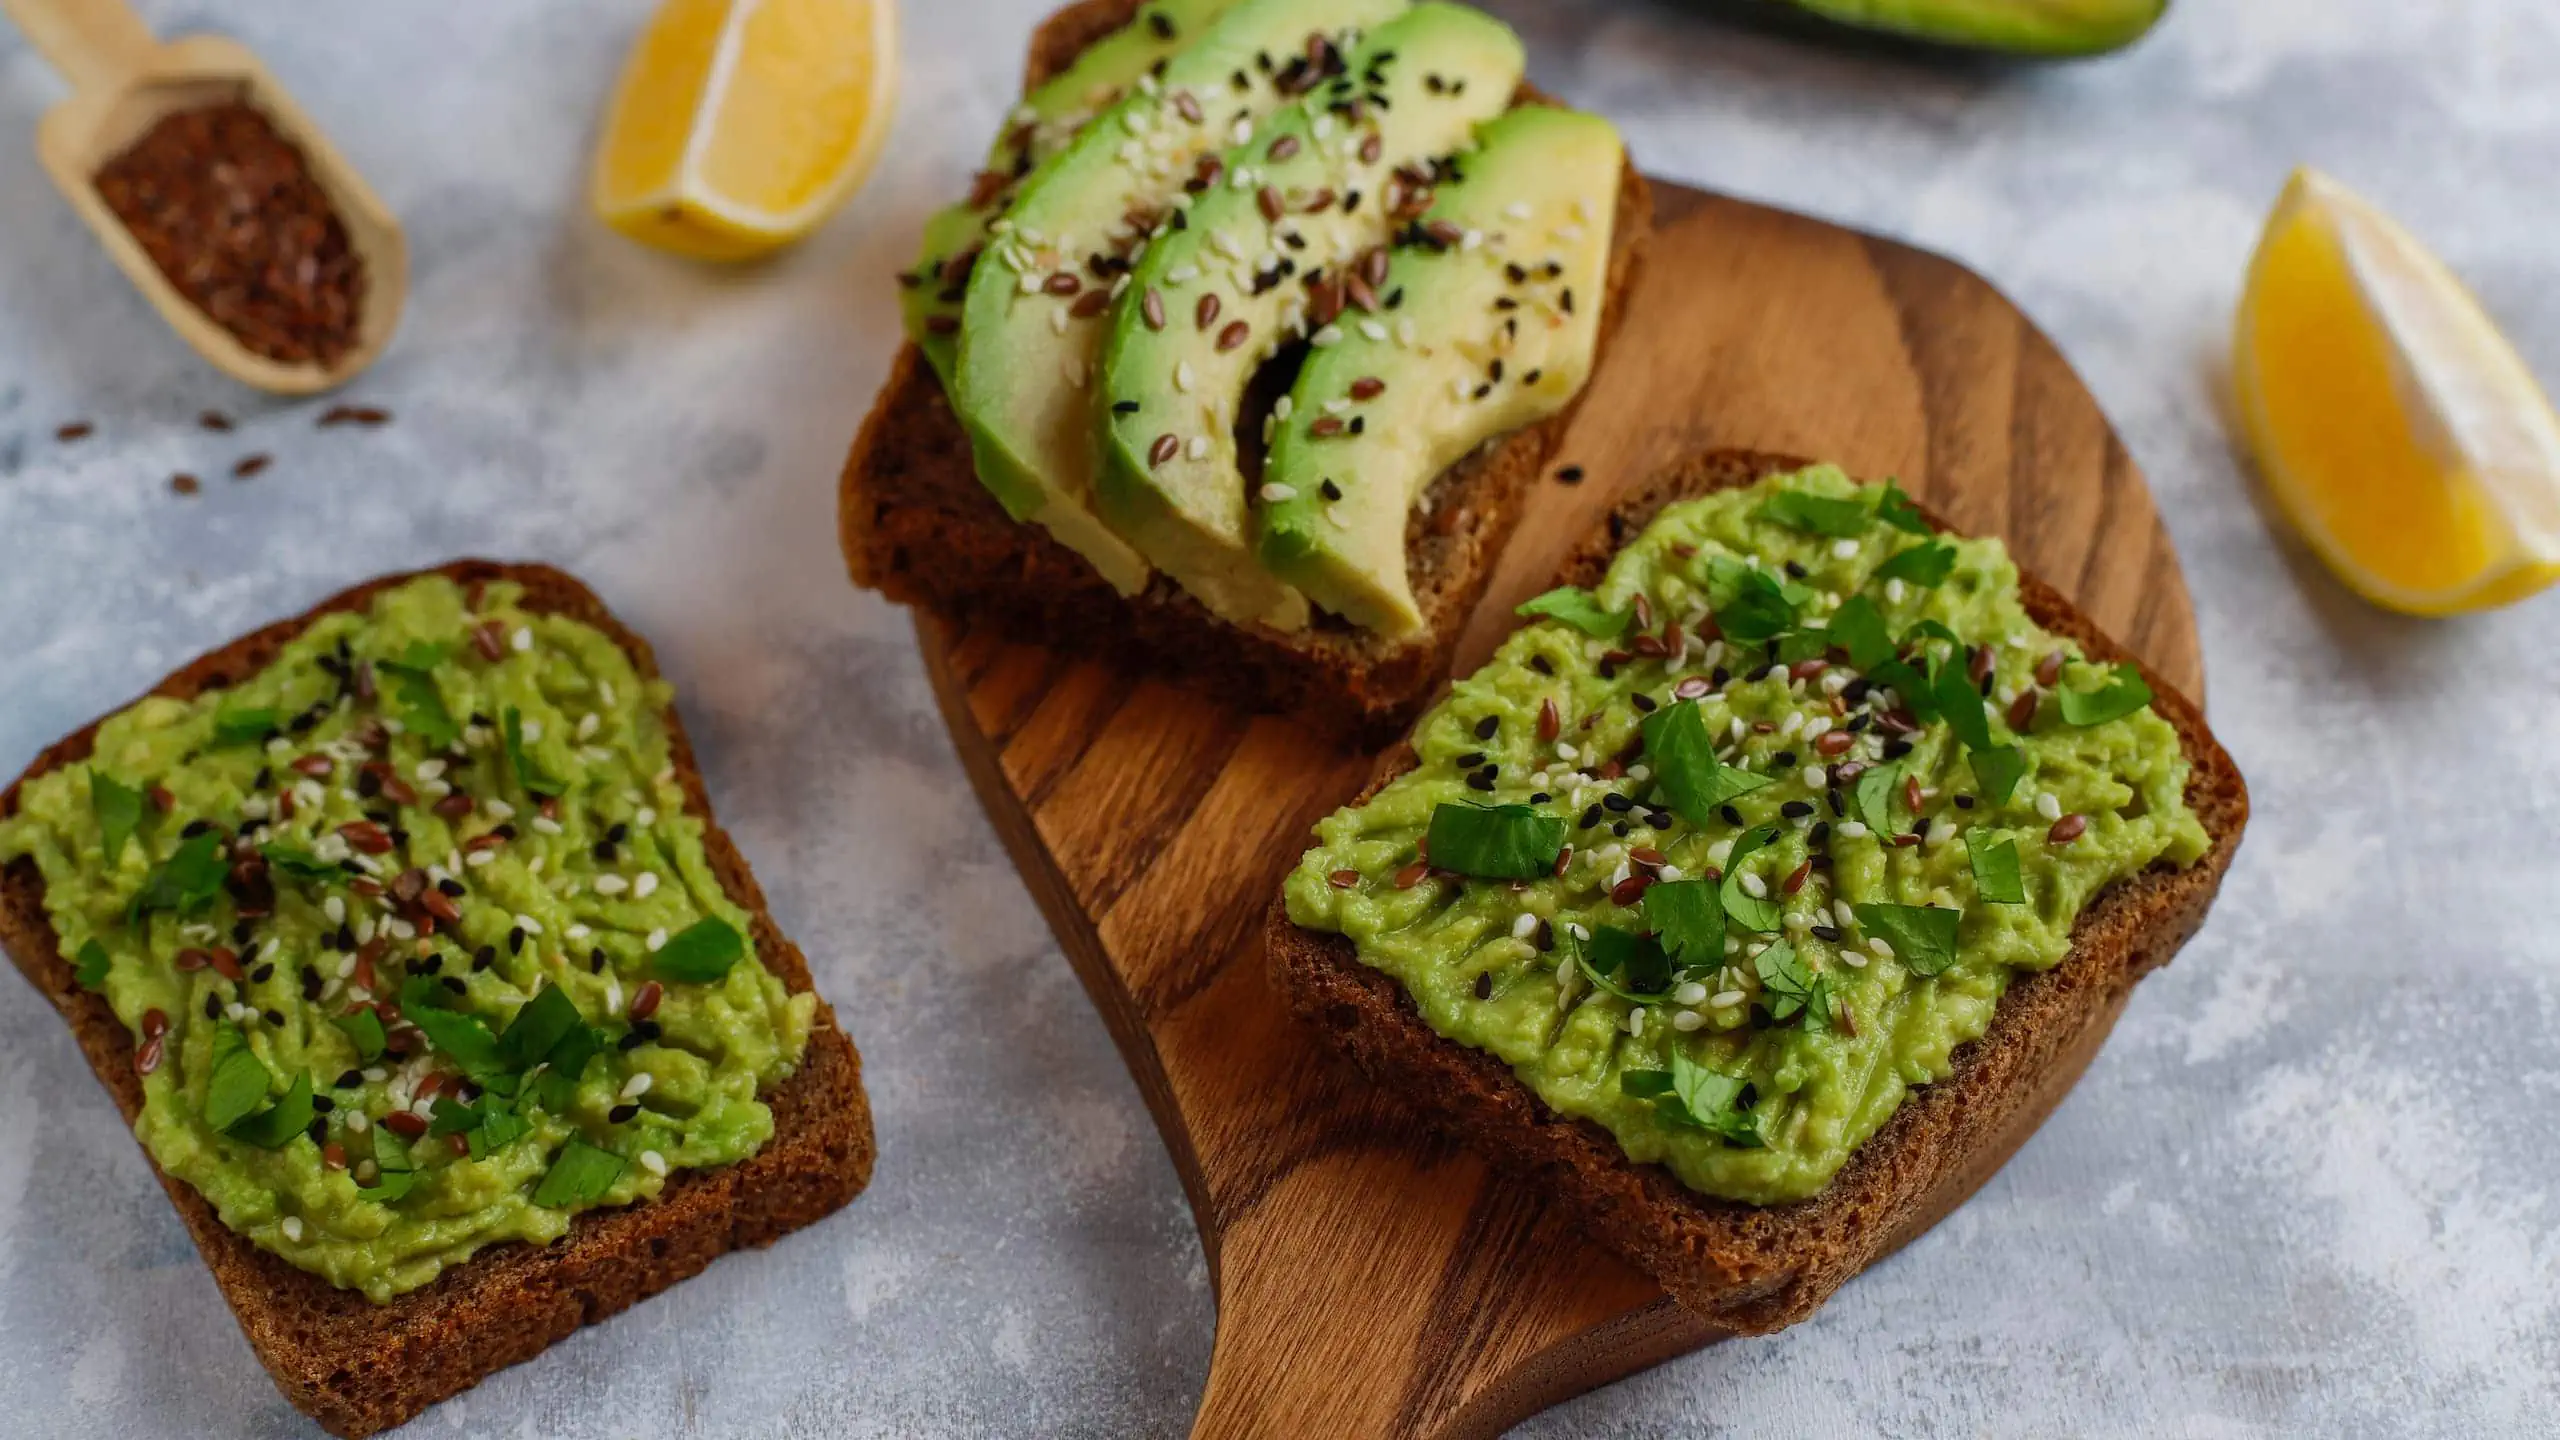 Our version of Dunkin Donuts’ avocado toast recipe